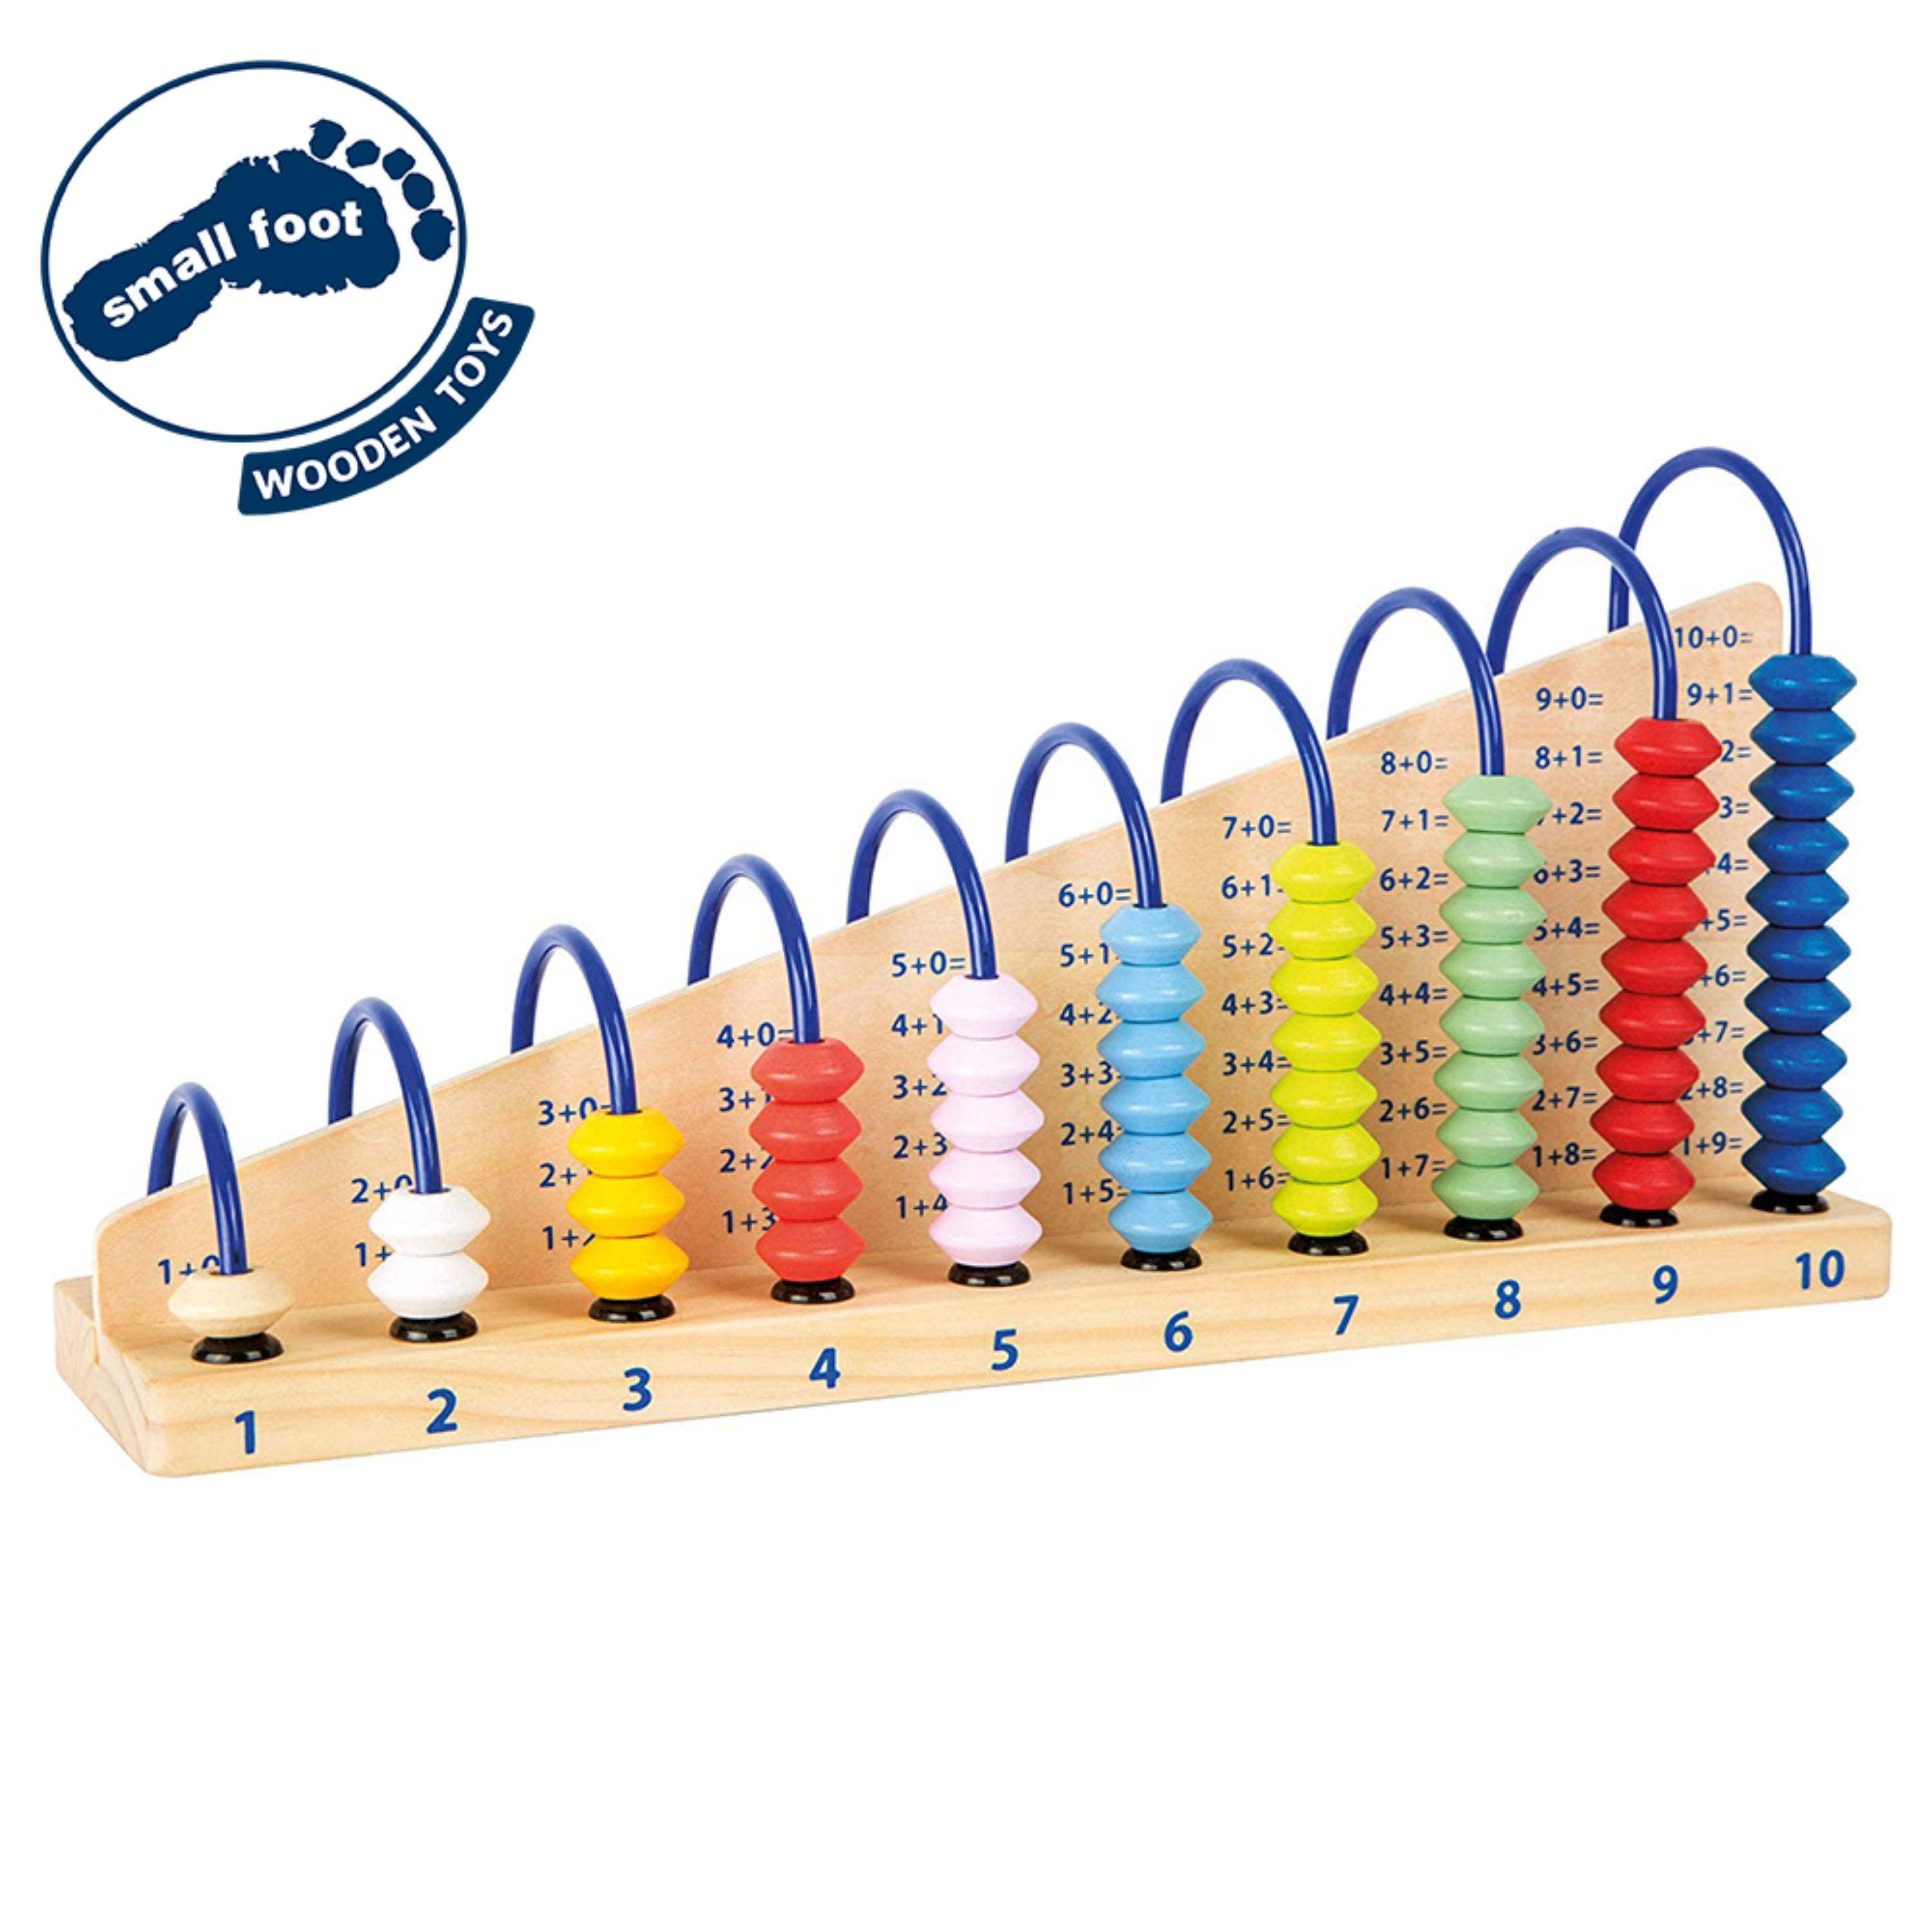 Small Foot ABACUS maths help toy wooden quality mathematics educational 2138 